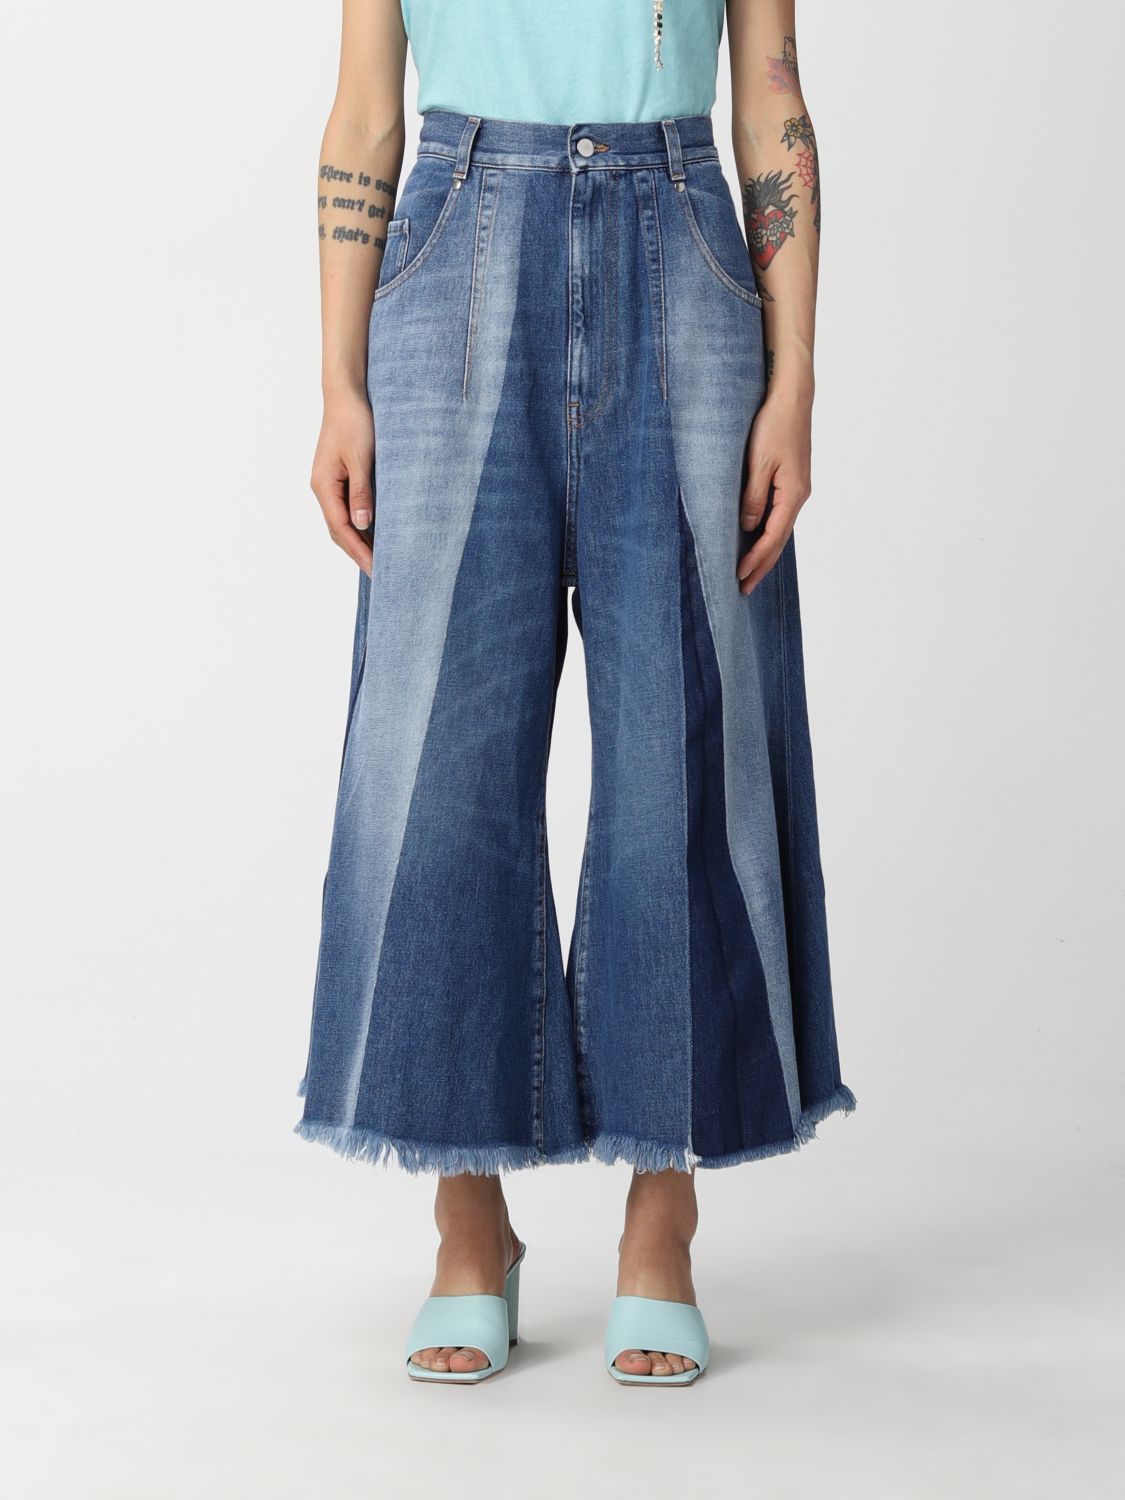 Jeans Circus Hotel: Circus Hotel cropped jeans in washed denim denim 1